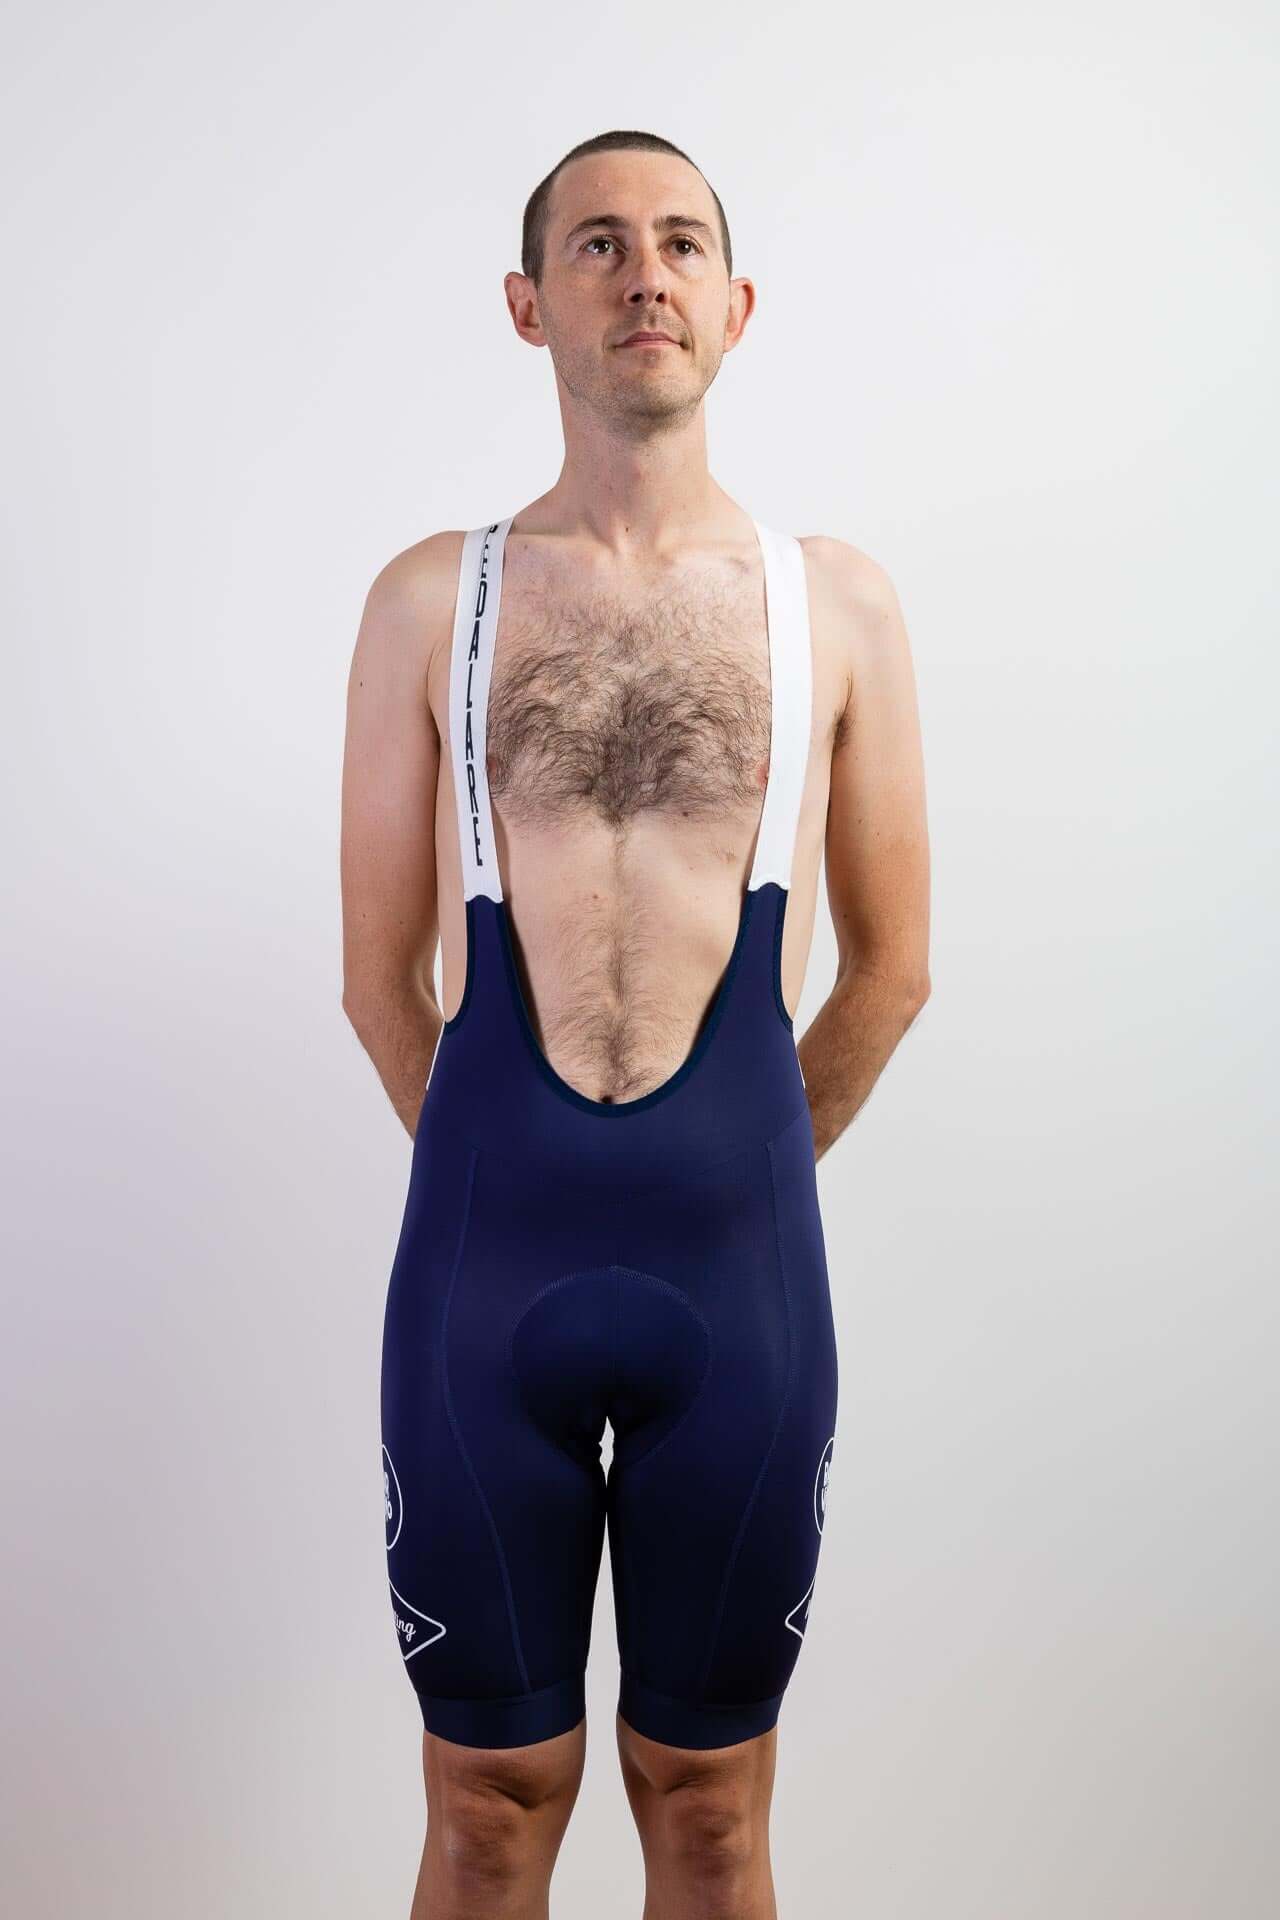 Men's Cycling Anniversary Bib Shorts - Premium design for comfort and performance. Celebrate with style on your bike rides! 